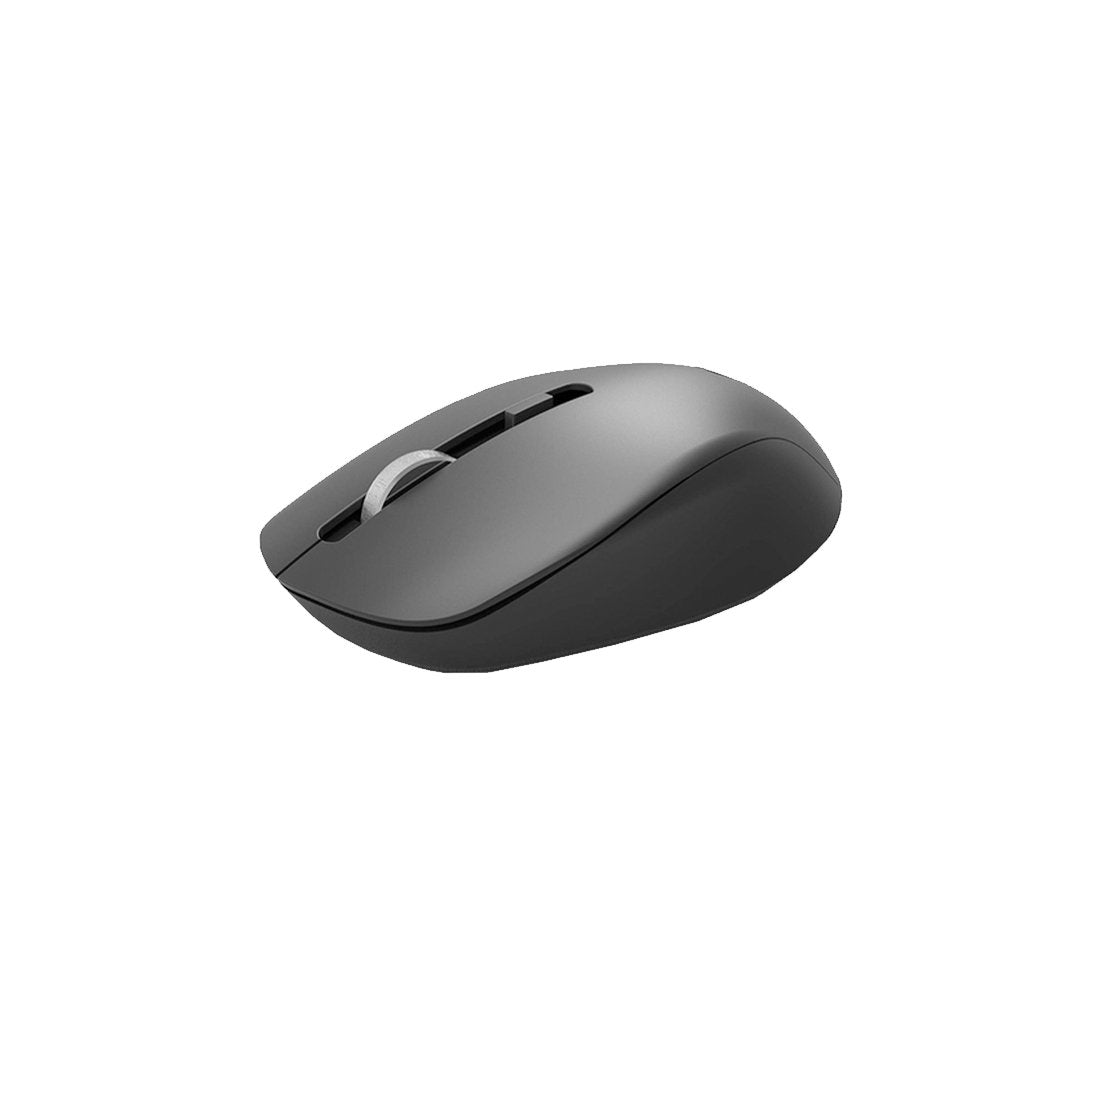 [RePacked] HP S1000 Plus Silent Optical Mouse with 1600 DPI and 2.4GHz Wireless Connection